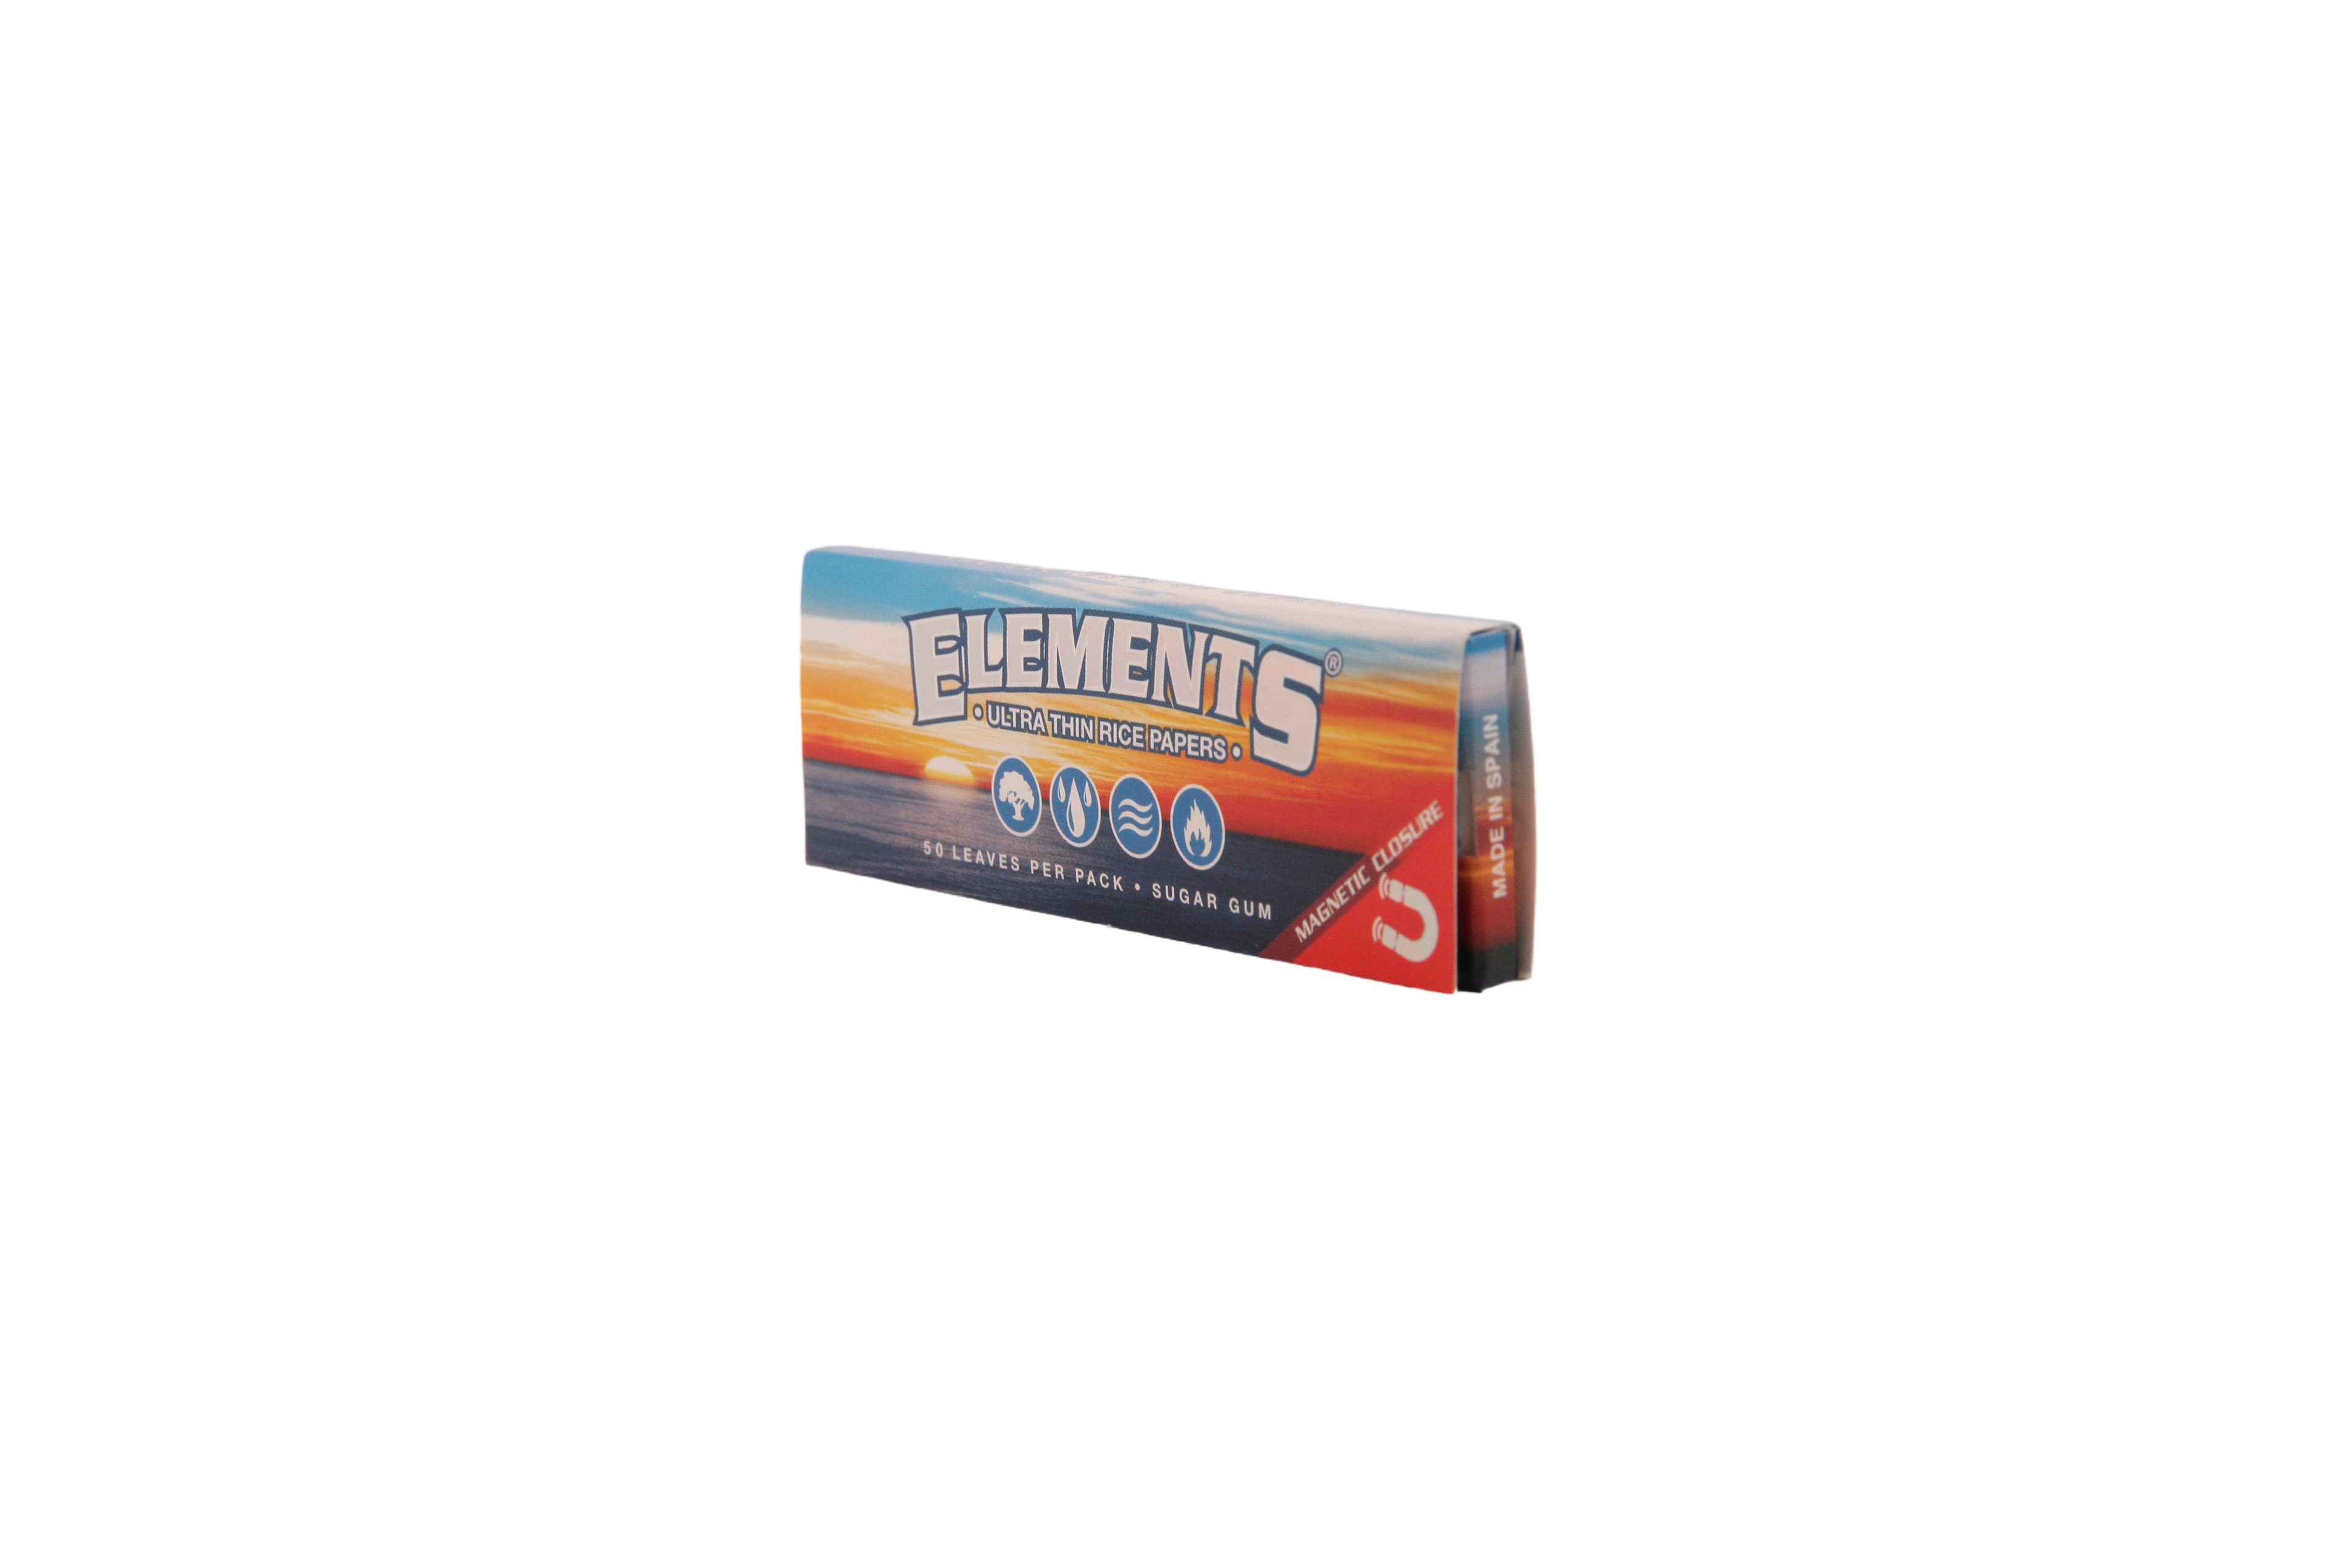 Elements Ultra Thin Rice Papers - 1 1/4